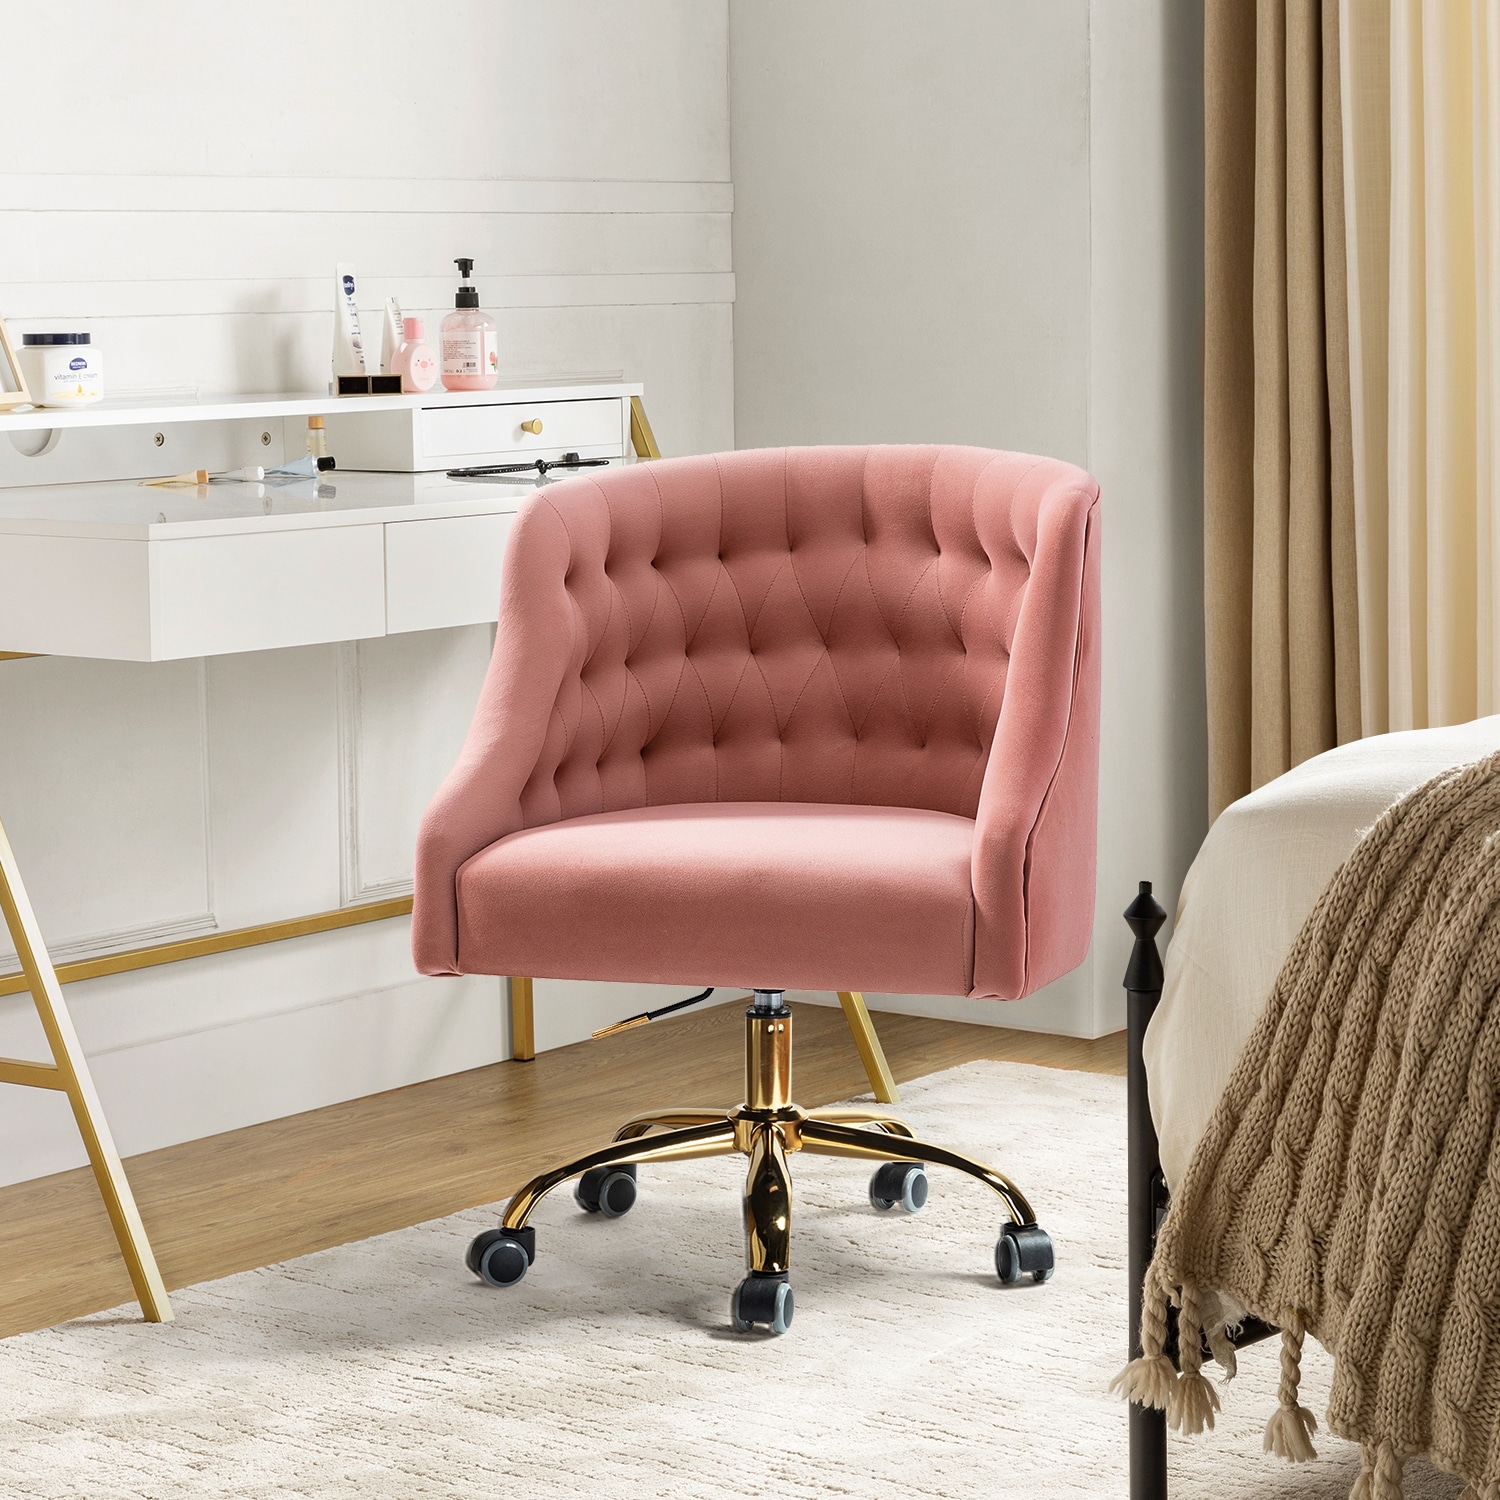 https://ak1.ostkcdn.com/images/products/is/images/direct/7e43fa5c1ad2ea03a0111d63d2a78ccd252294fb/Modern-Velvet-Tufted-Office-Chair-with-Gold-Metal-Base-by-HULALA-HOME.jpg